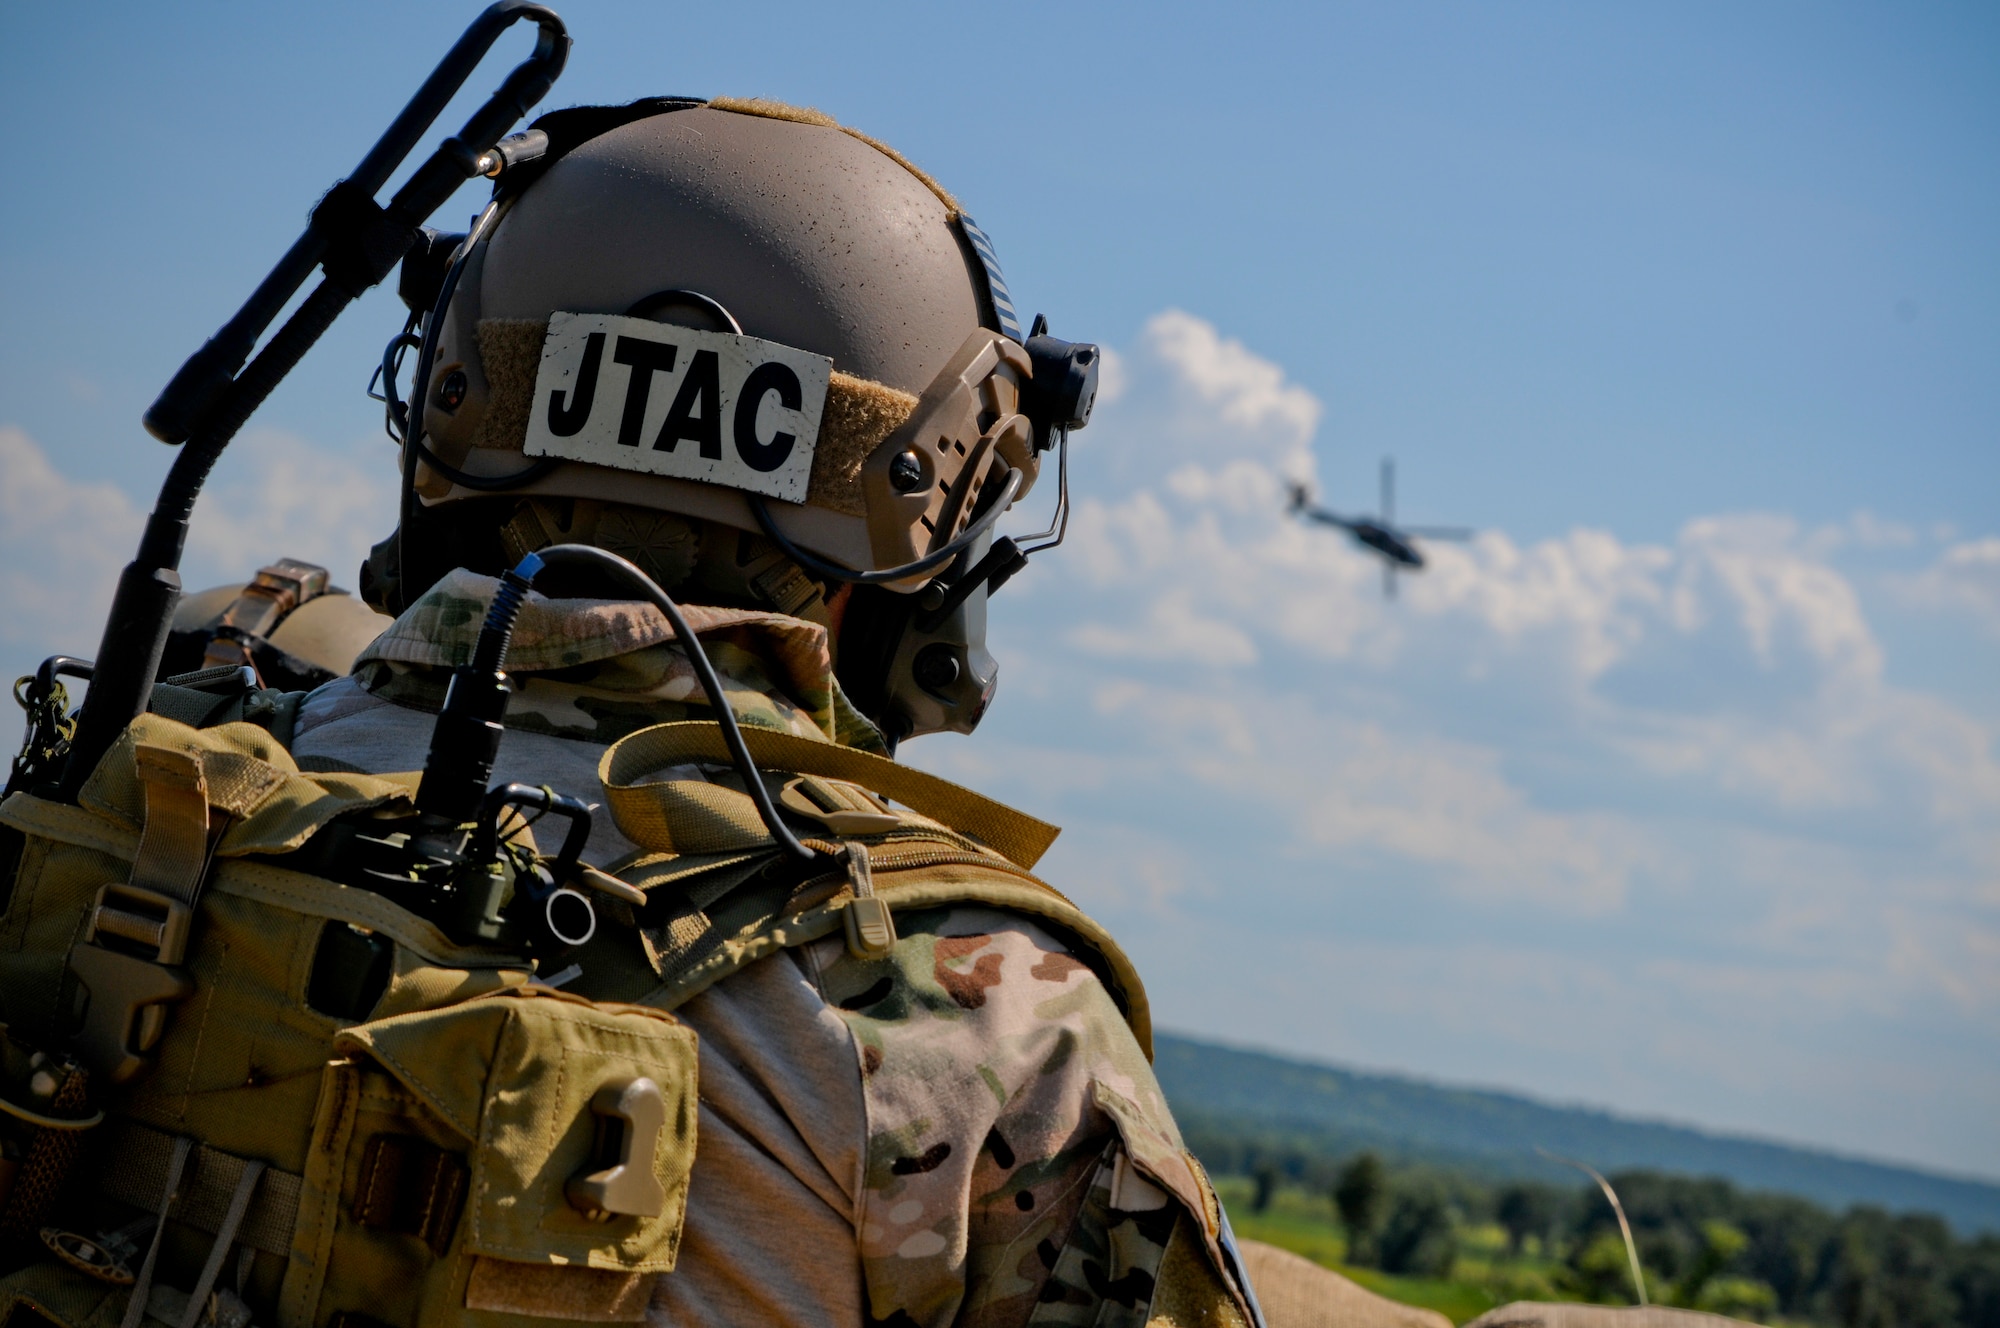 Tech. Sgt. Robert Ellis, Detachment 1 Joint Terminal Attack Controller liaison and evaluator, looks into the distance as an Army UH-60 Black Hawk helicopter performs a show of force flyover during a training simulation at Razorback Range Det. 1 Aug. 1, 2015. Ellis, along with his joint training partners in the Army and Navy, participated in a simulated training event demonstrating the unique capabilities of Razorback Range Det. 1 located at Fort Chaffee Maneuver Training Center, Ark. (U.S. Air National Guard photo by Capt. Holli Nelson/Released)